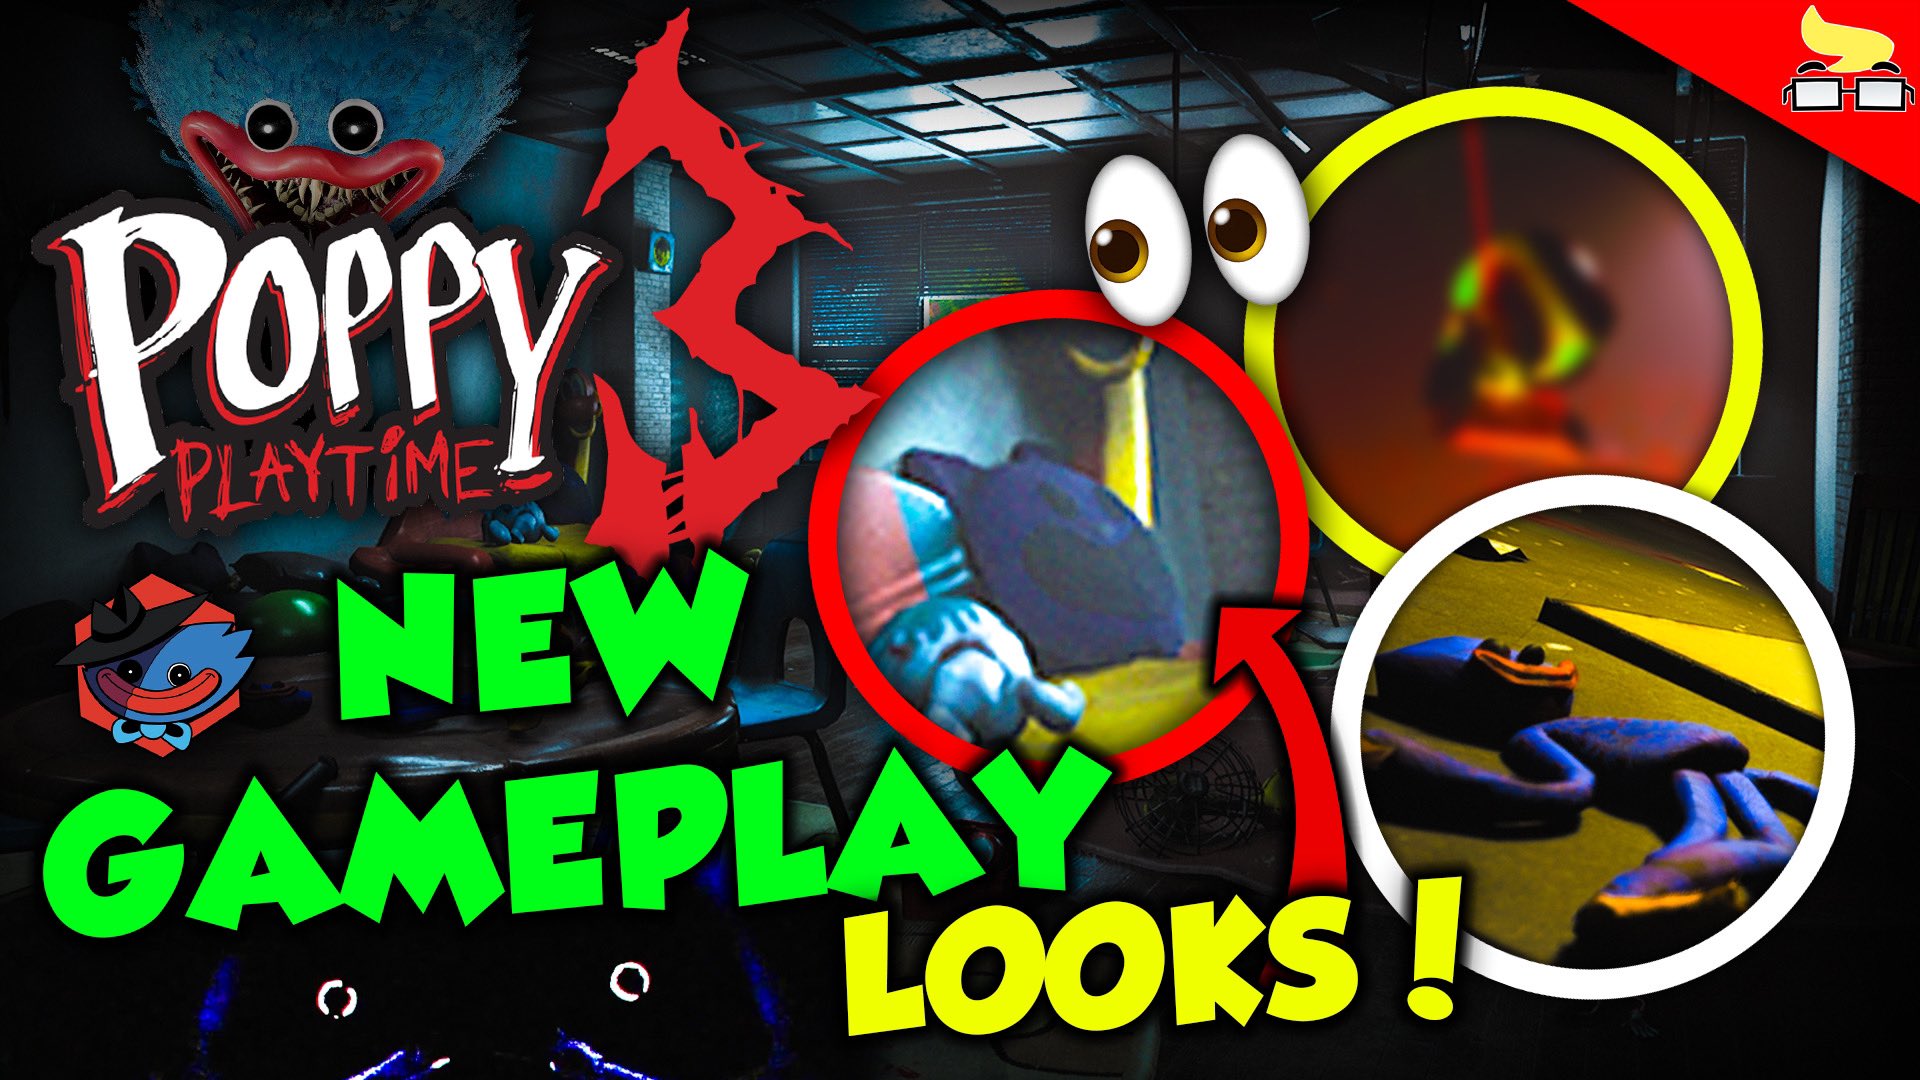 Nized on X: *NEW* POPPY PLAYTIME CHAPTER 3 GAMEPLAY LOOKS! Classroom,  Dorm, & More! New Video -  - #MobPartnersInCrime  #PoppyPlaytime #PoppyPlaytimeChapter3  / X